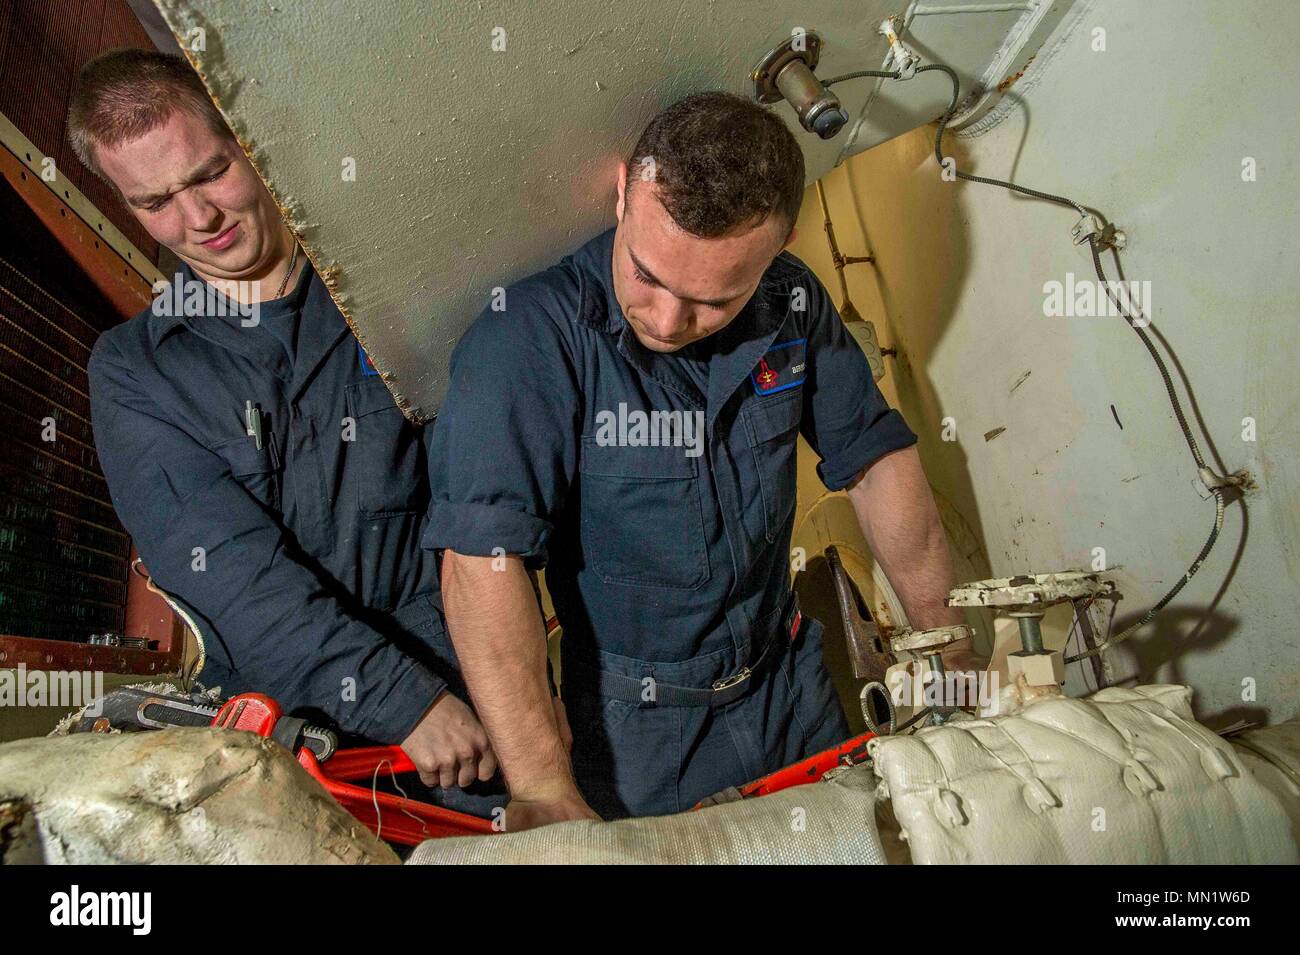 170809-N-NG136-003 ATLANTIC OCEAN (Aug. 9, 2017) Fireman Recruit Tony J. Smithlin, left, and Machinist's Mate Fireman Jordan E. Berry tighten a valve on a preheater aboard the aircraft carrier USS George H.W. Bush (CVN 77). The ship and its carrier strike group are conducting naval operations in the U.S. 6th Fleet area of operations in support of U.S. national security interests in Europe and Africa. (U.S. Navy photo by Mass Communication Specialist Seaman Zachary P. Wickline/Released) Stock Photo